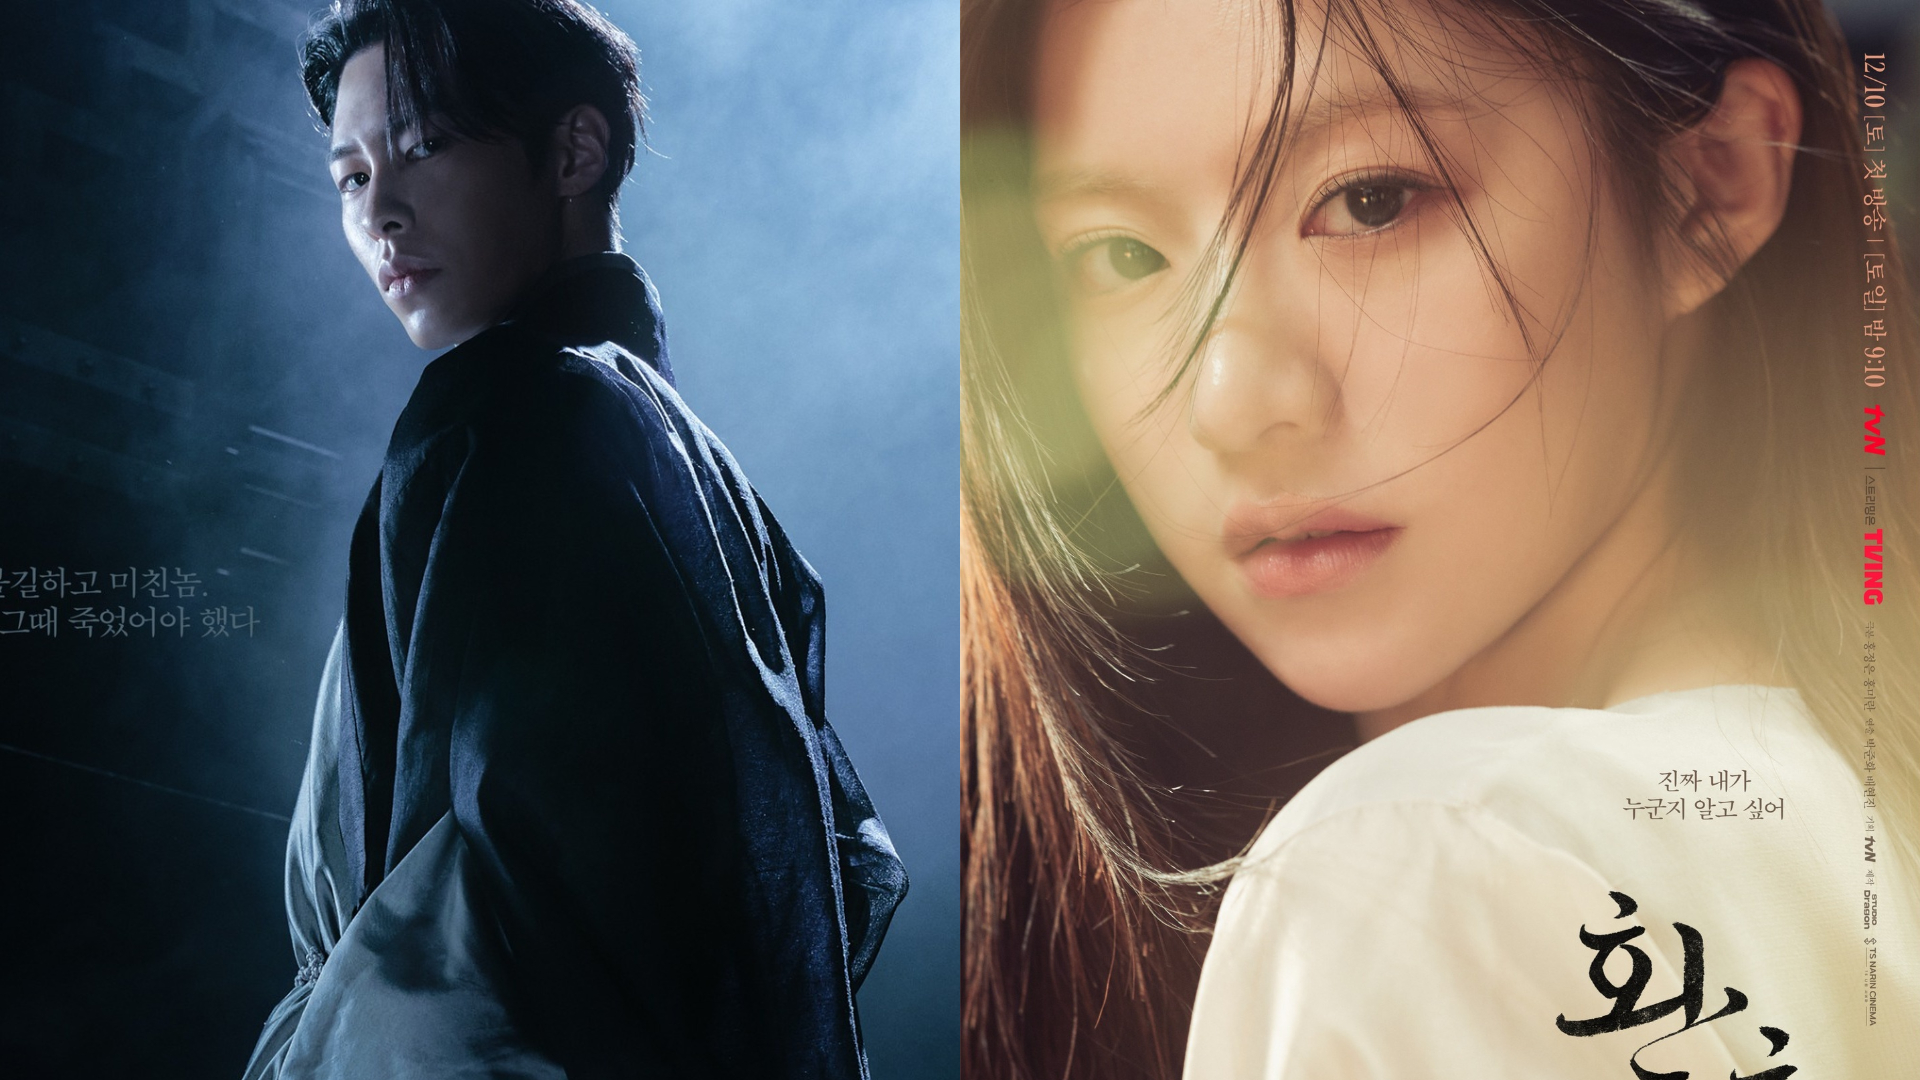 Alchemy of Souls Part 2 Arrives With Mysterious Posters Featuring Lee Jae Wook and Go Yoon Jung